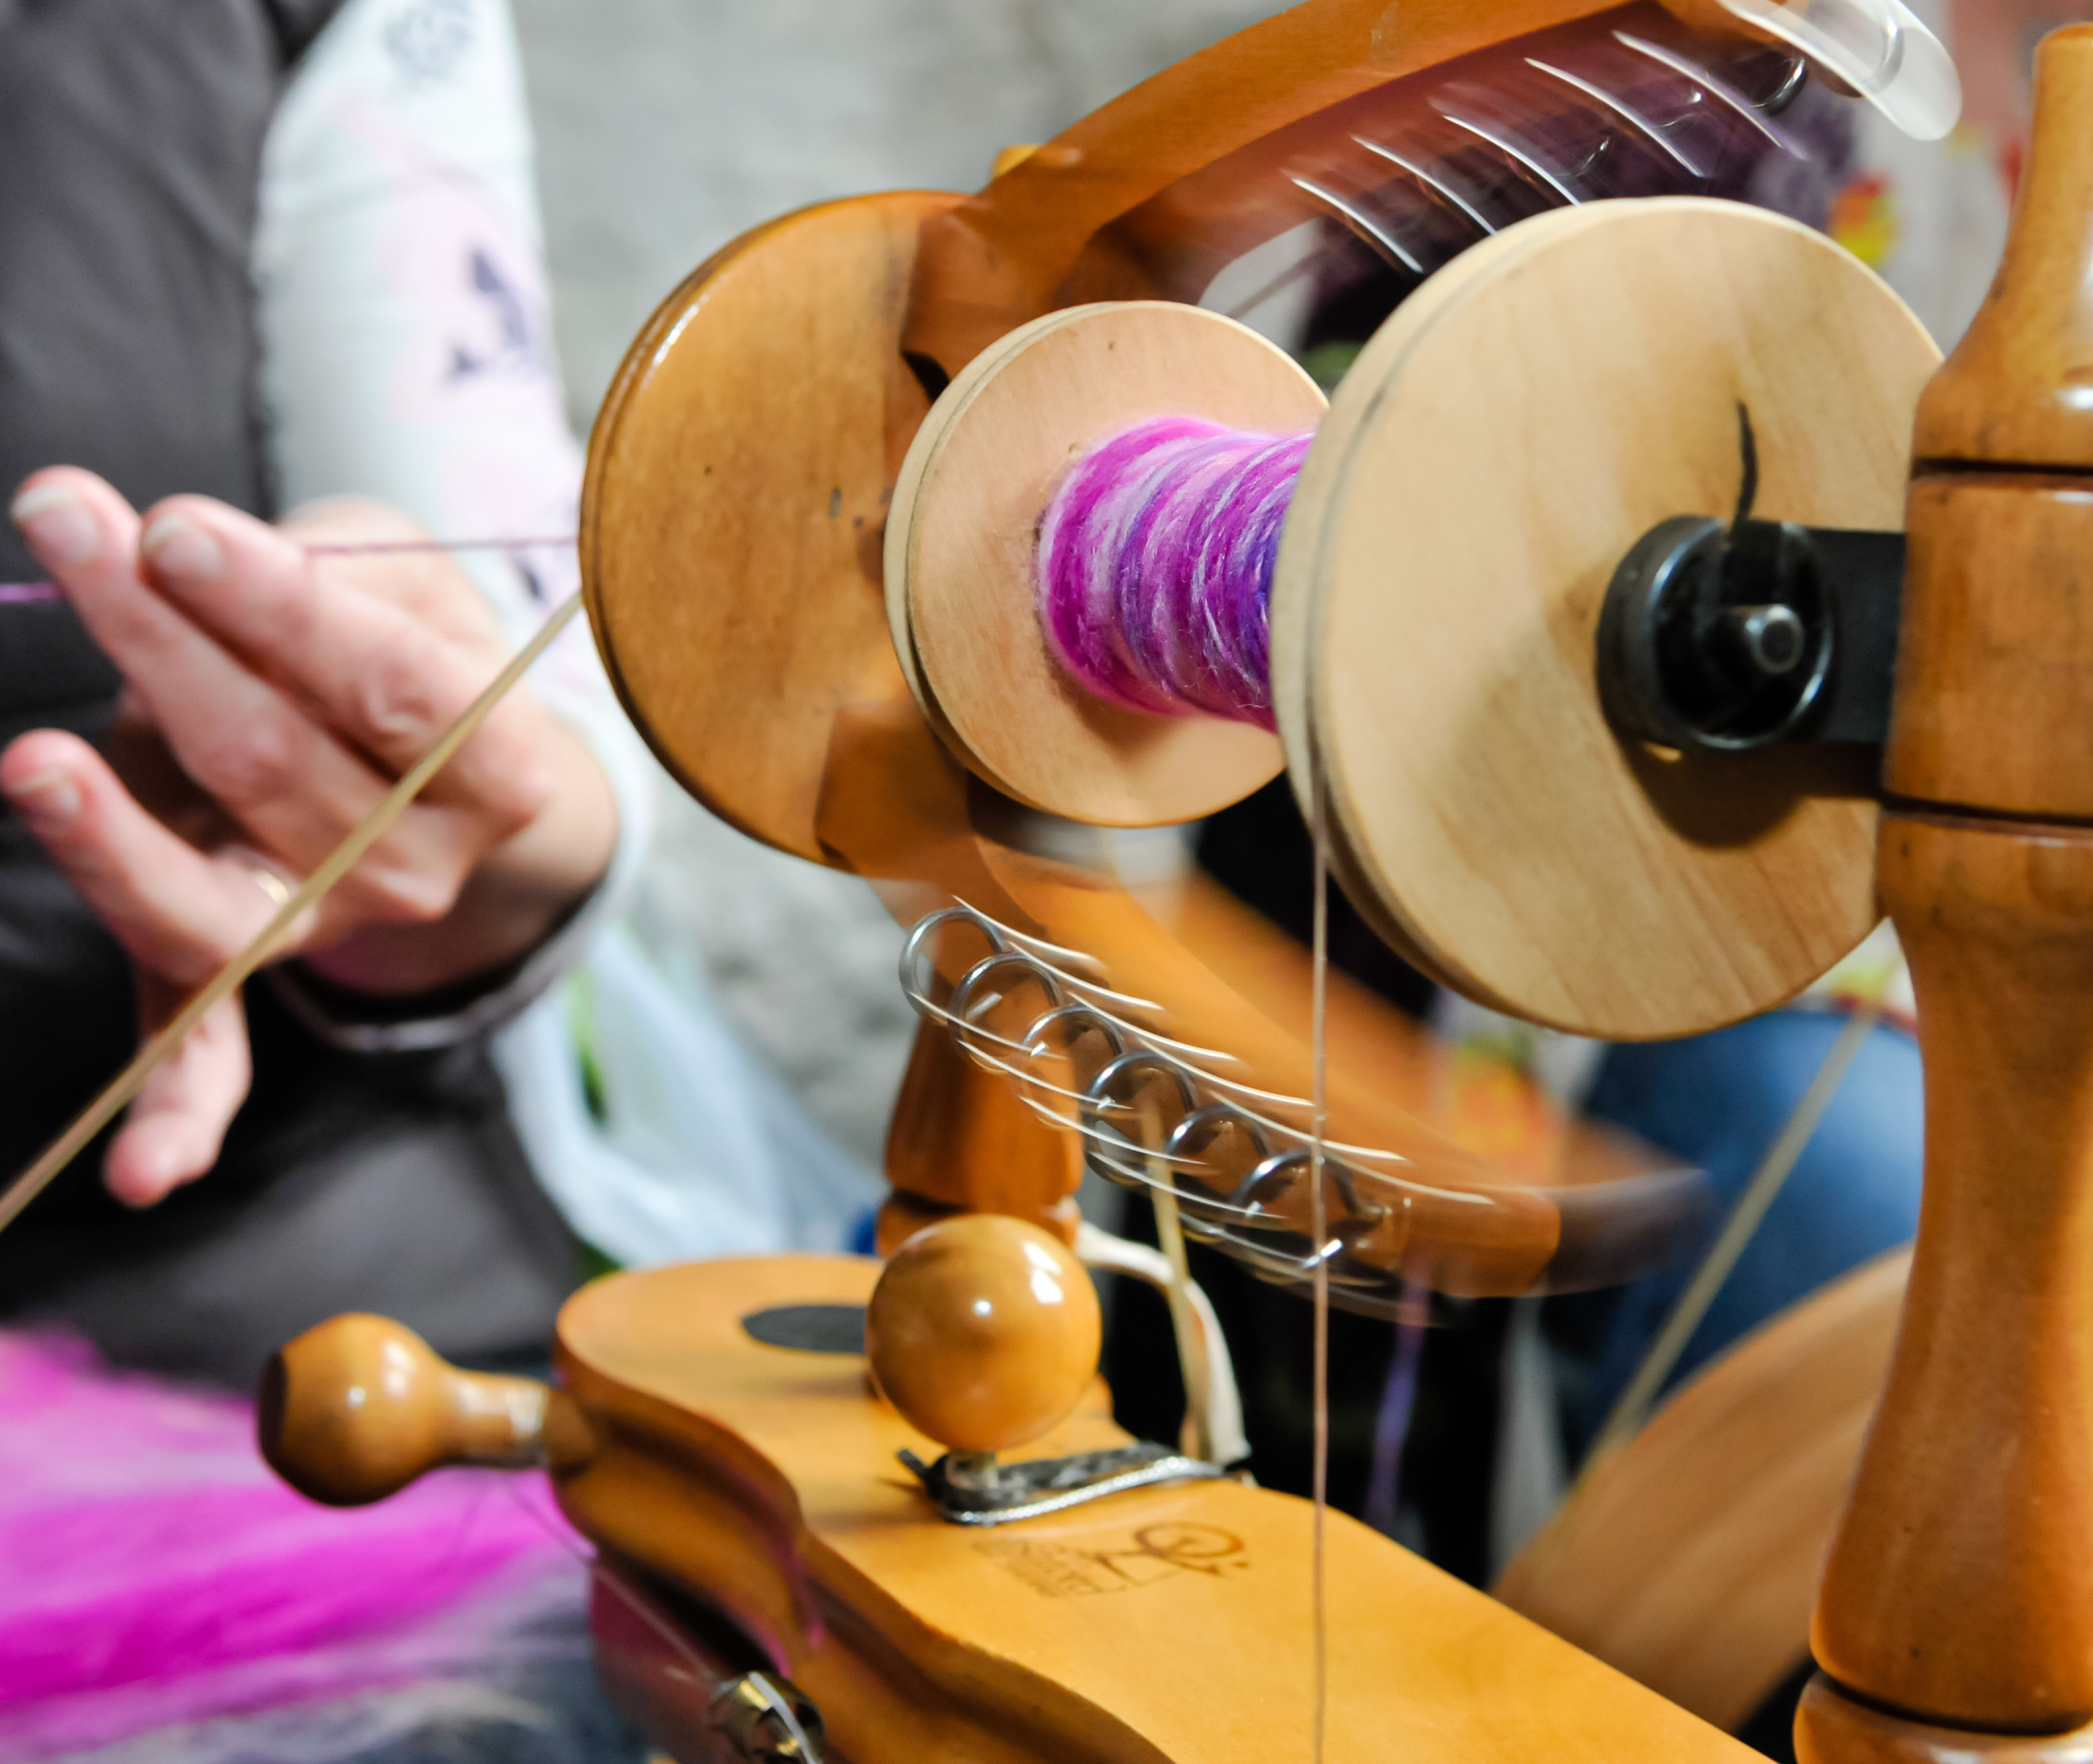 Come along to Sutherland Library on Saturday 25 May to watch the Sutherland Shire Spinners and Weavers prepare, knit and weave beautiful woollen pieces.